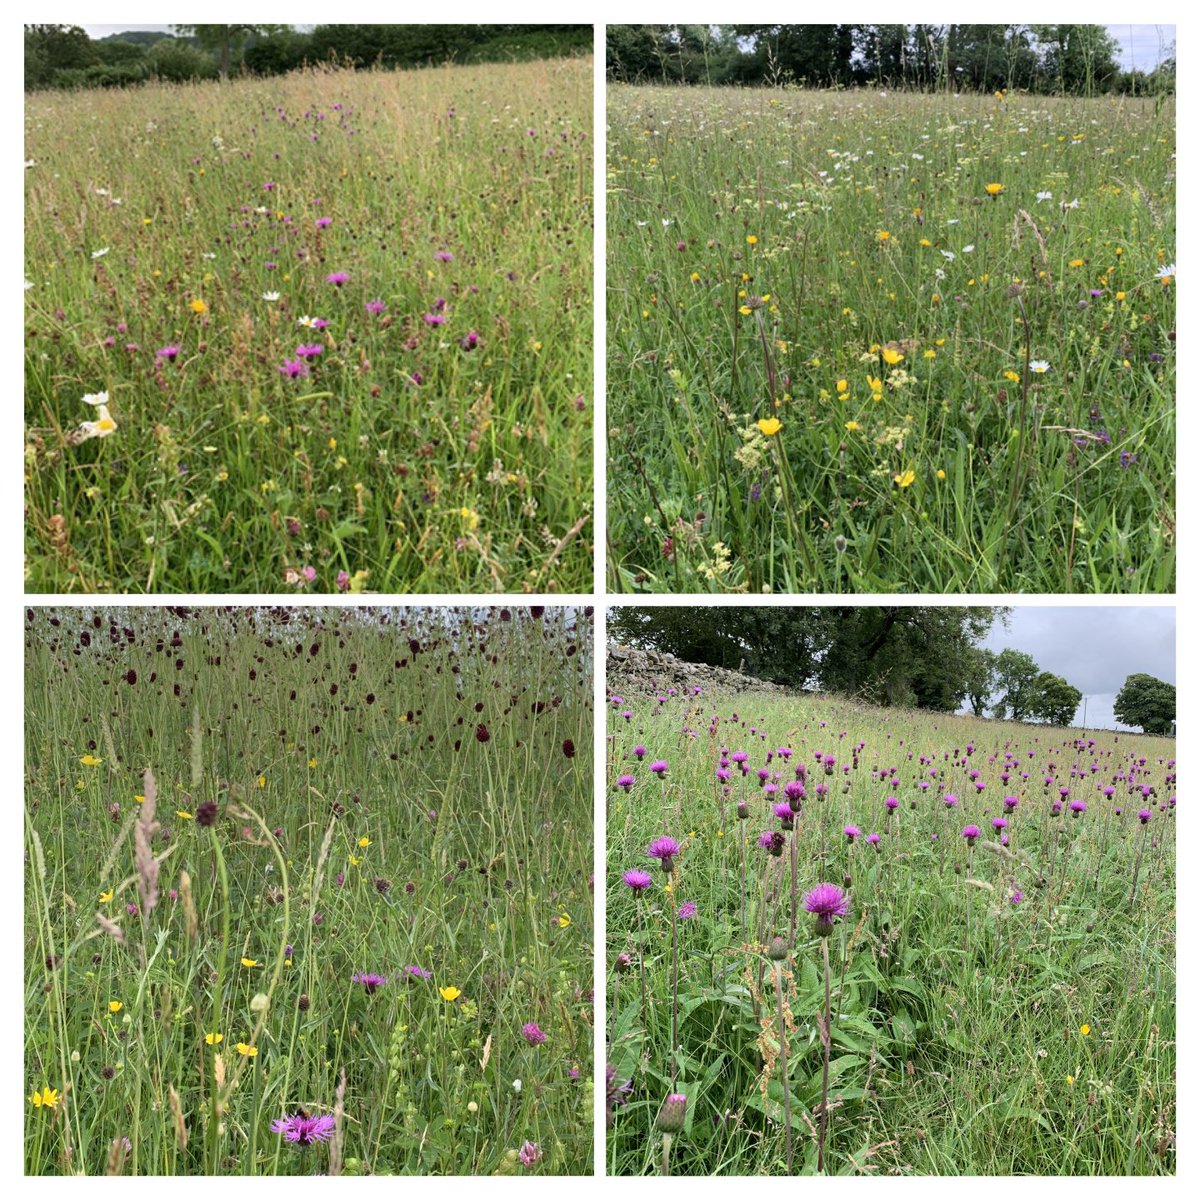 It’s #NationalMeadowsDay if you get the chance visit a meadow this w/e. Just to see how special they are. Worthy of celebration. Worthy of protection. I hope that we can we have as many meadows and grasslands safeguarded for future generations. ⁦@Love_plants⁩